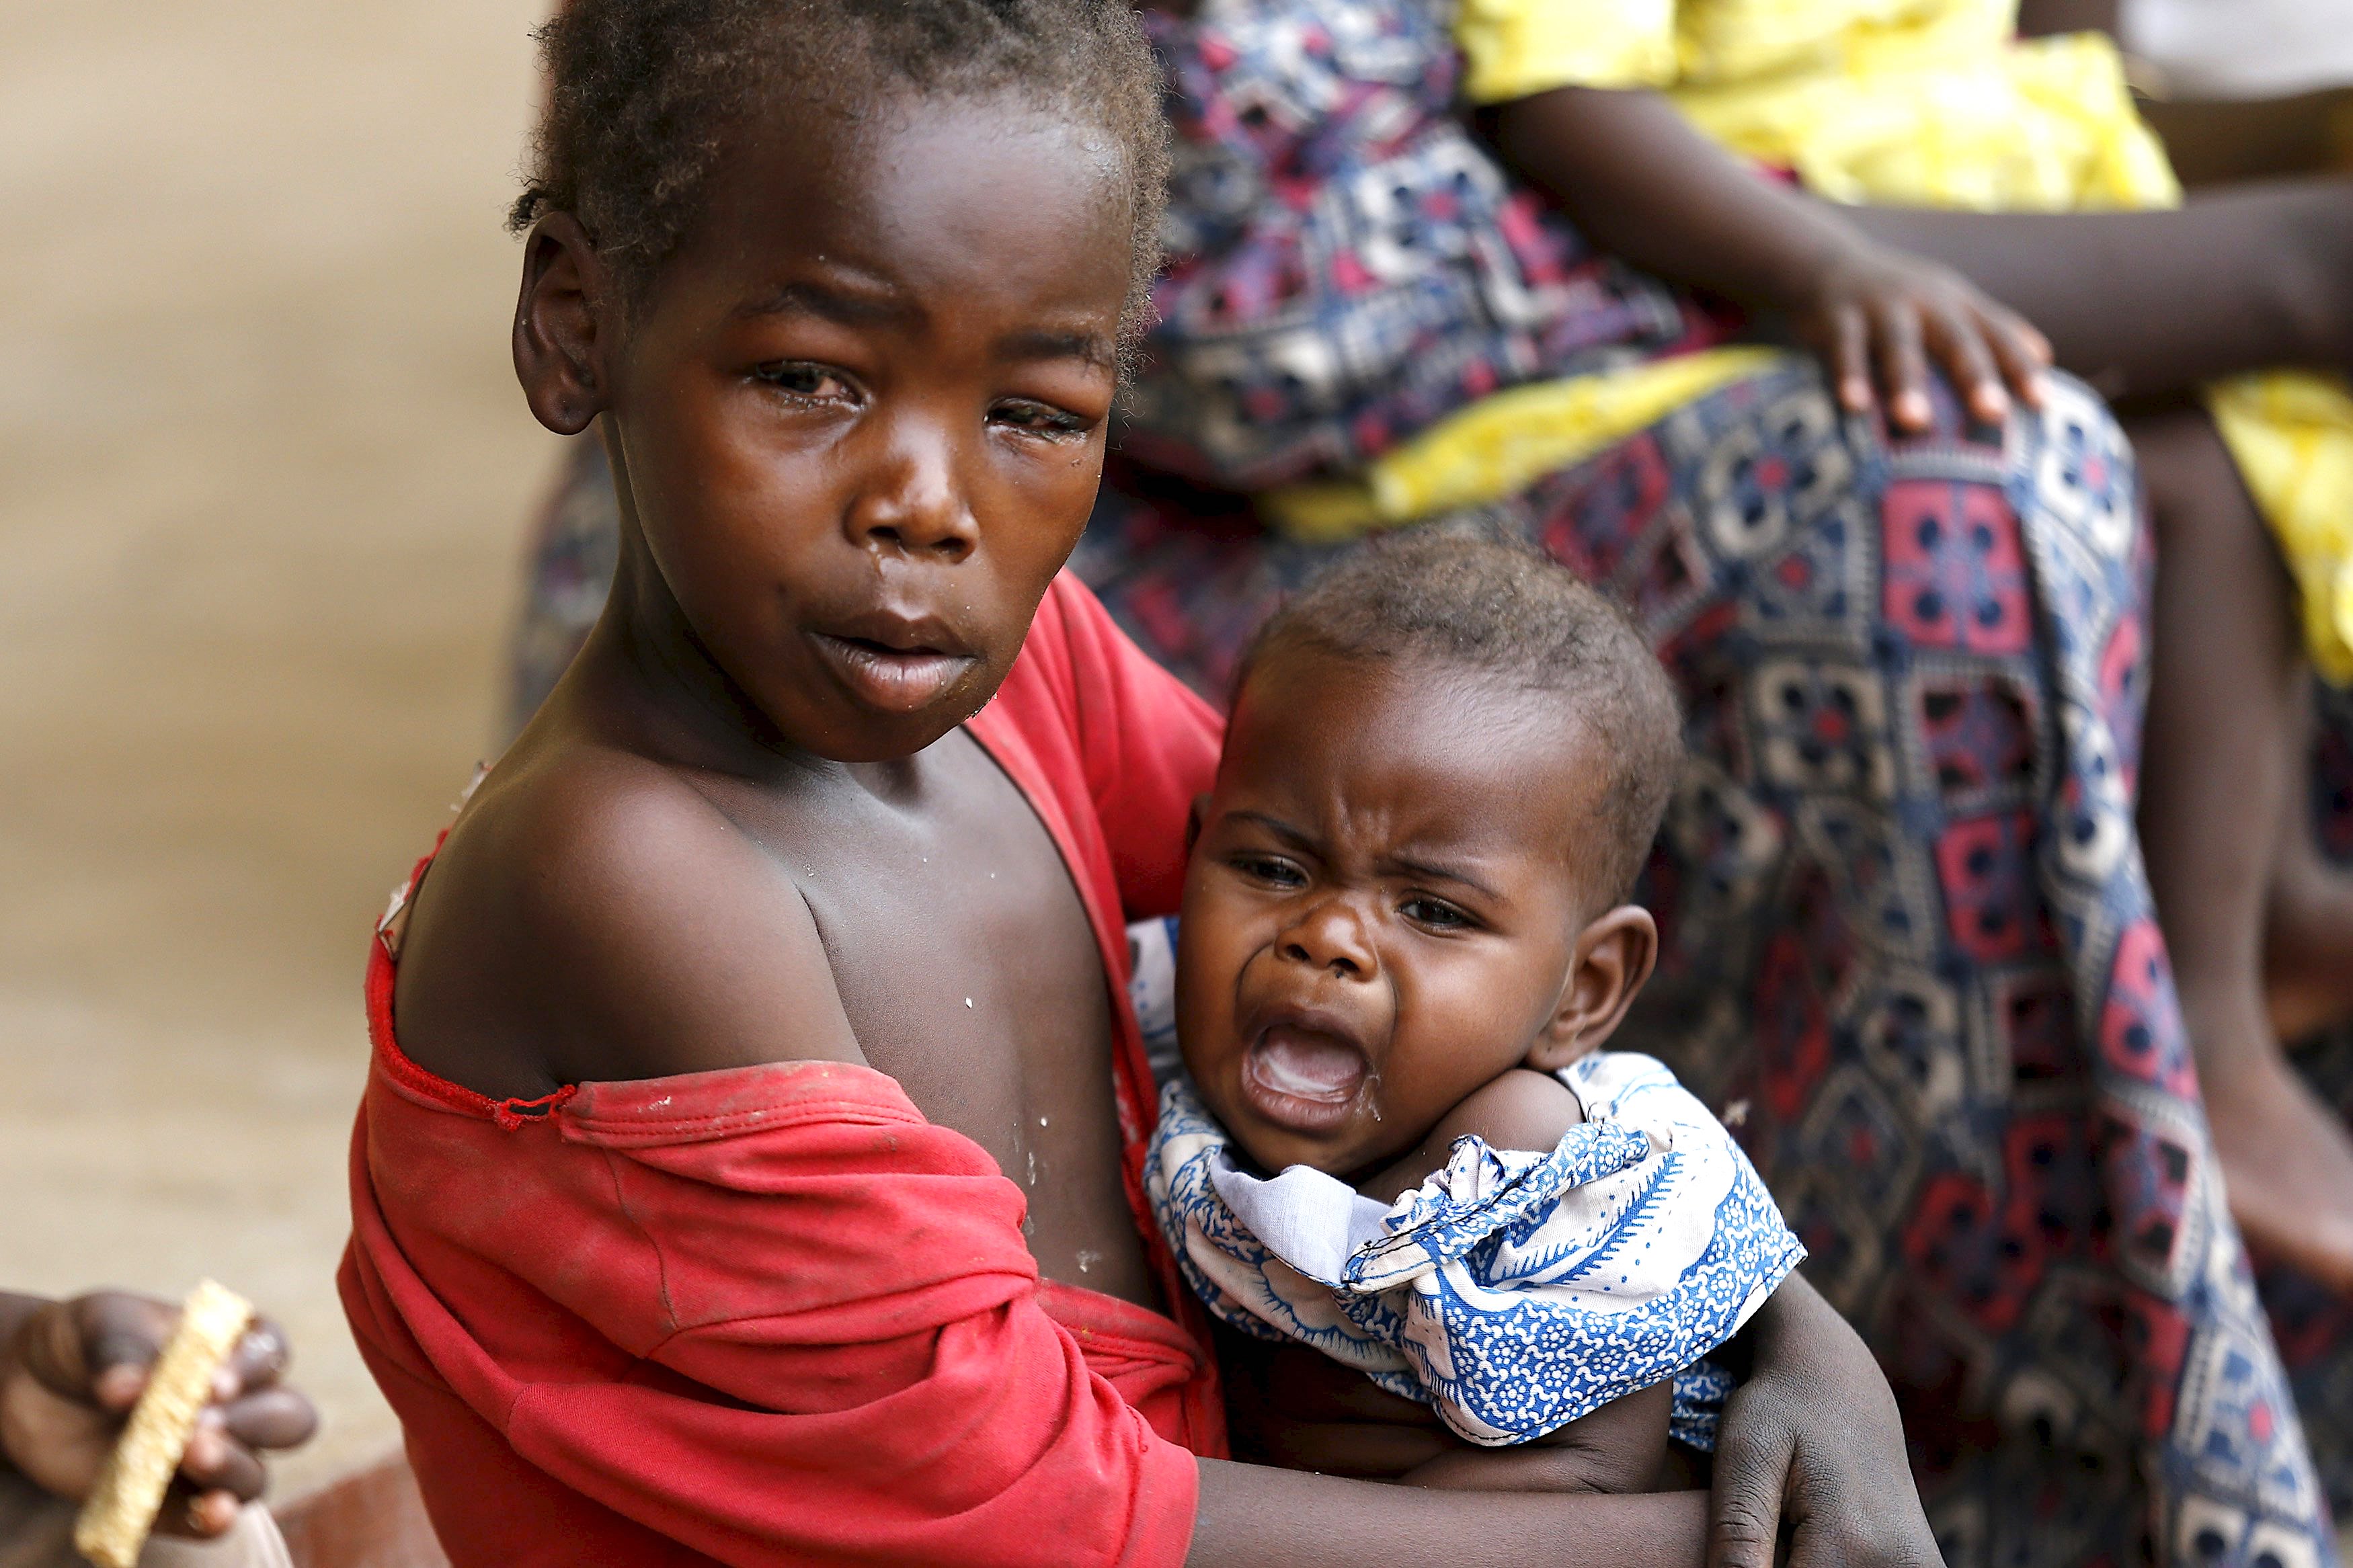 A child rescued from Boko Haram in Sambisa forest carries a baby in front of a clinic at the Malkohi camp for Internally Displaced People in Yola, Adamawa State, Nigeria May 3, 2015. Hundreds of traumatised Nigerian women and children rescued from Boko Haram Islamists have been released into the care of authorities at a refugee camp in the eastern town of Yola, an army spokesman said. REUTERS/Afolabi Sotunde